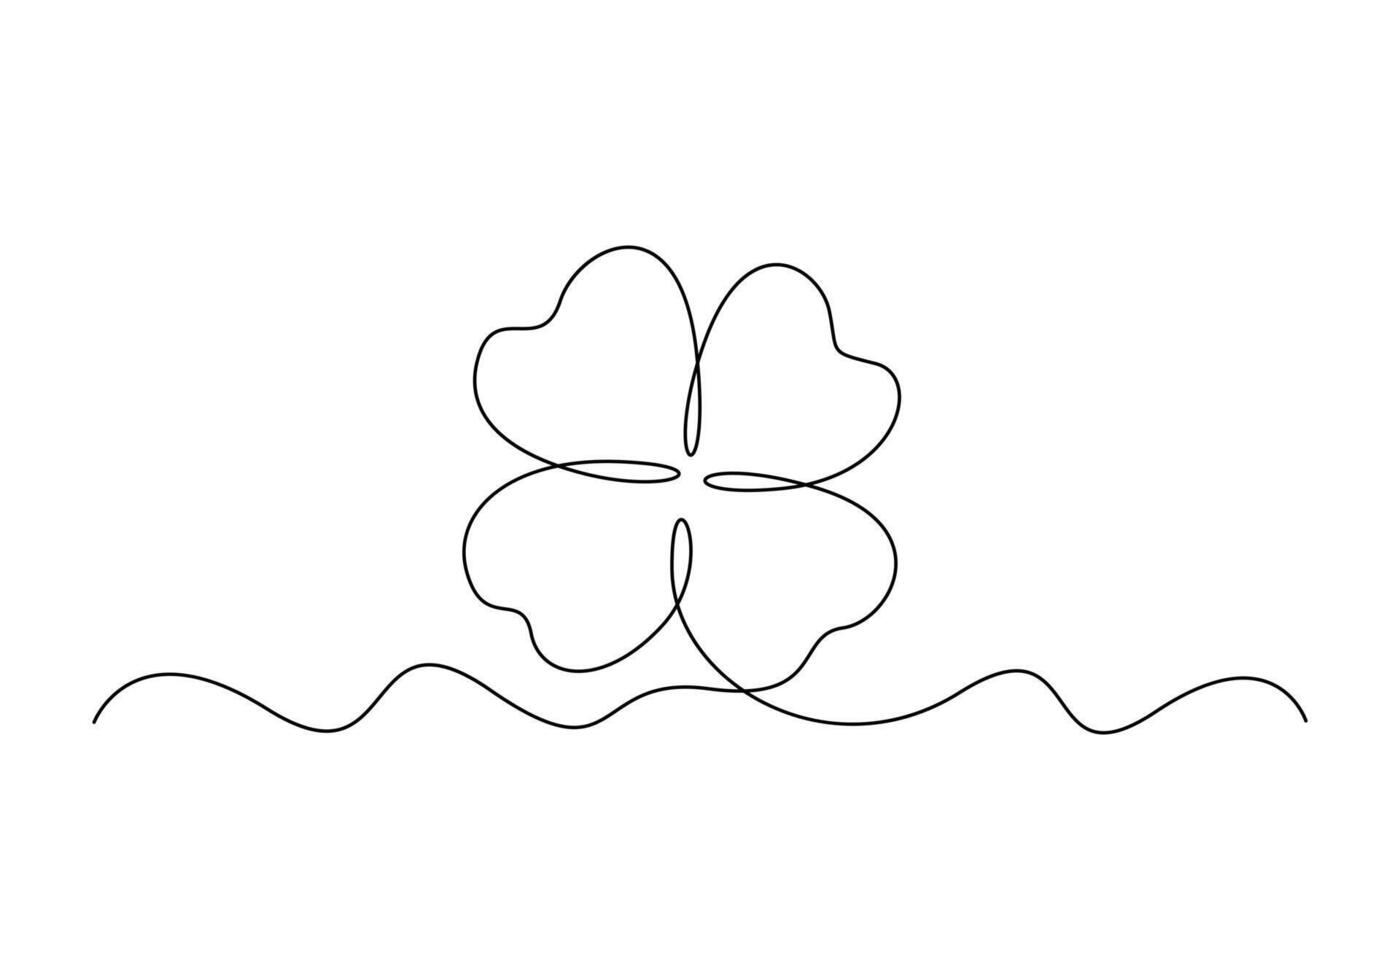 Four leaves clover continuous one line drawing premium illustration vector